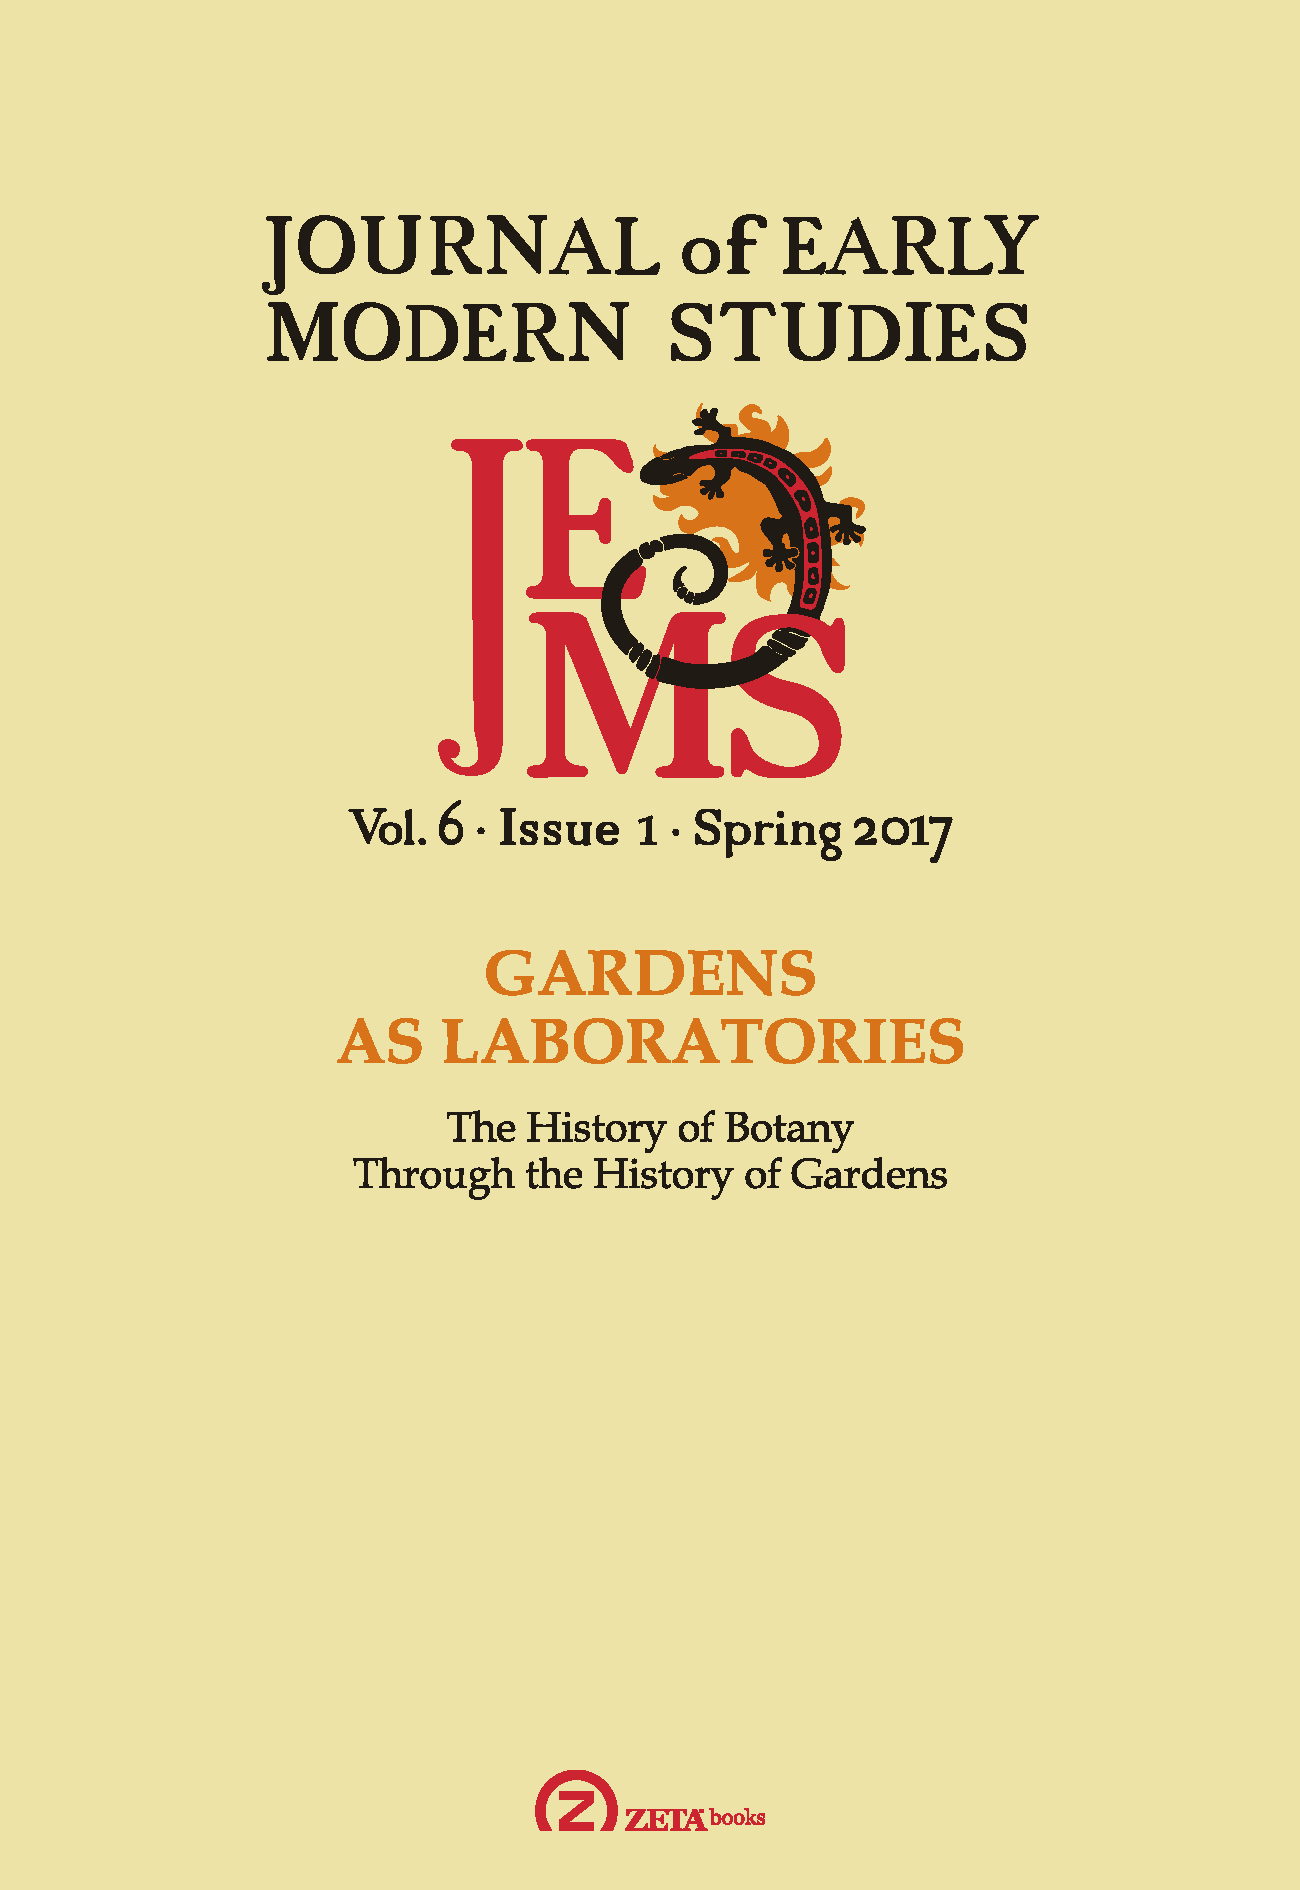 Introduction: Gardens as Laboratories. A History of Botanical Sciences